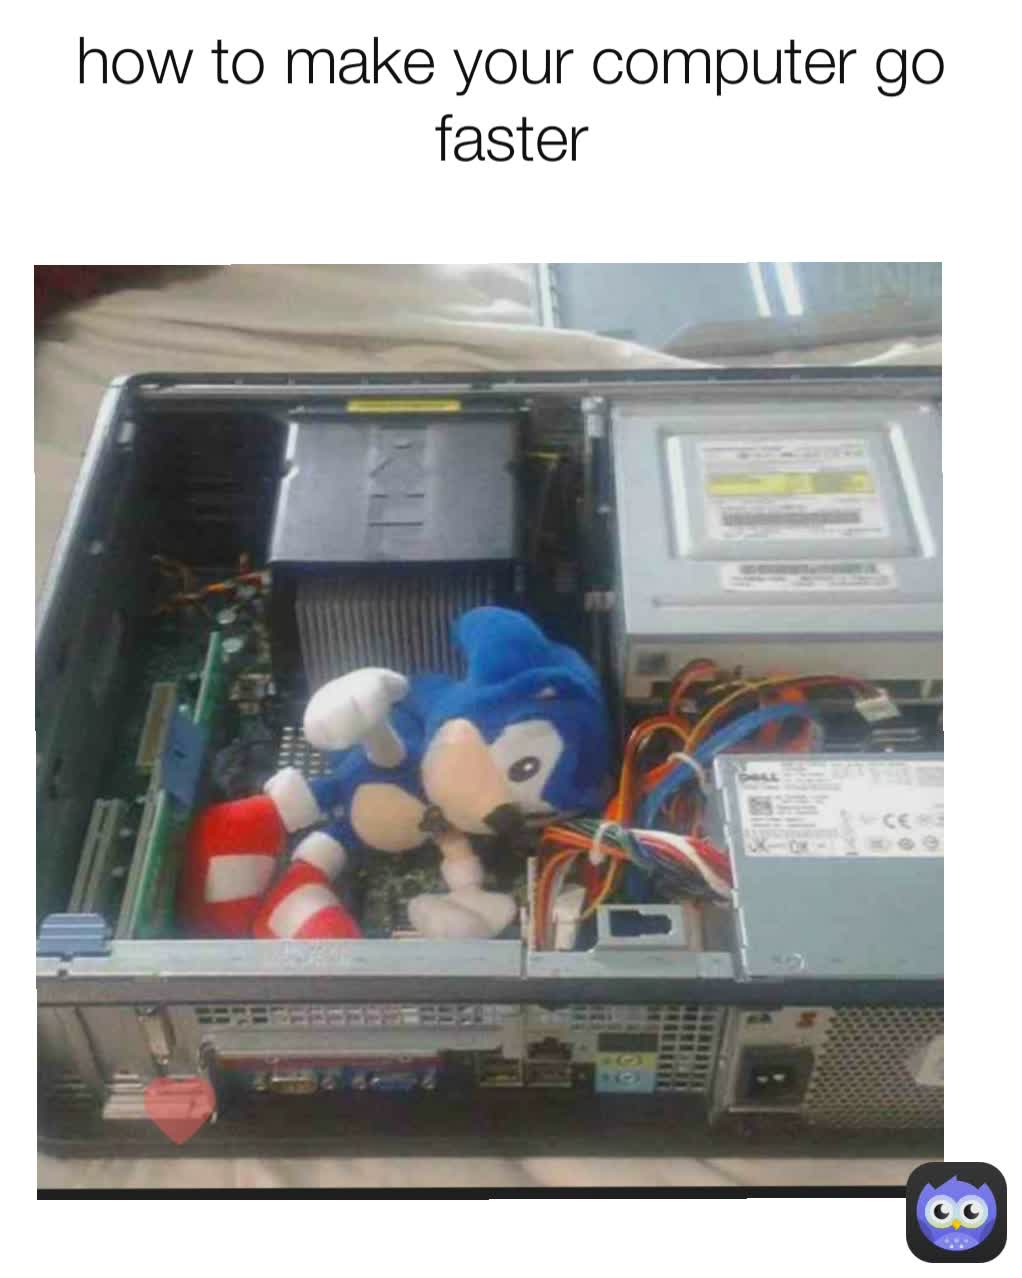 how to make computer faster sonic